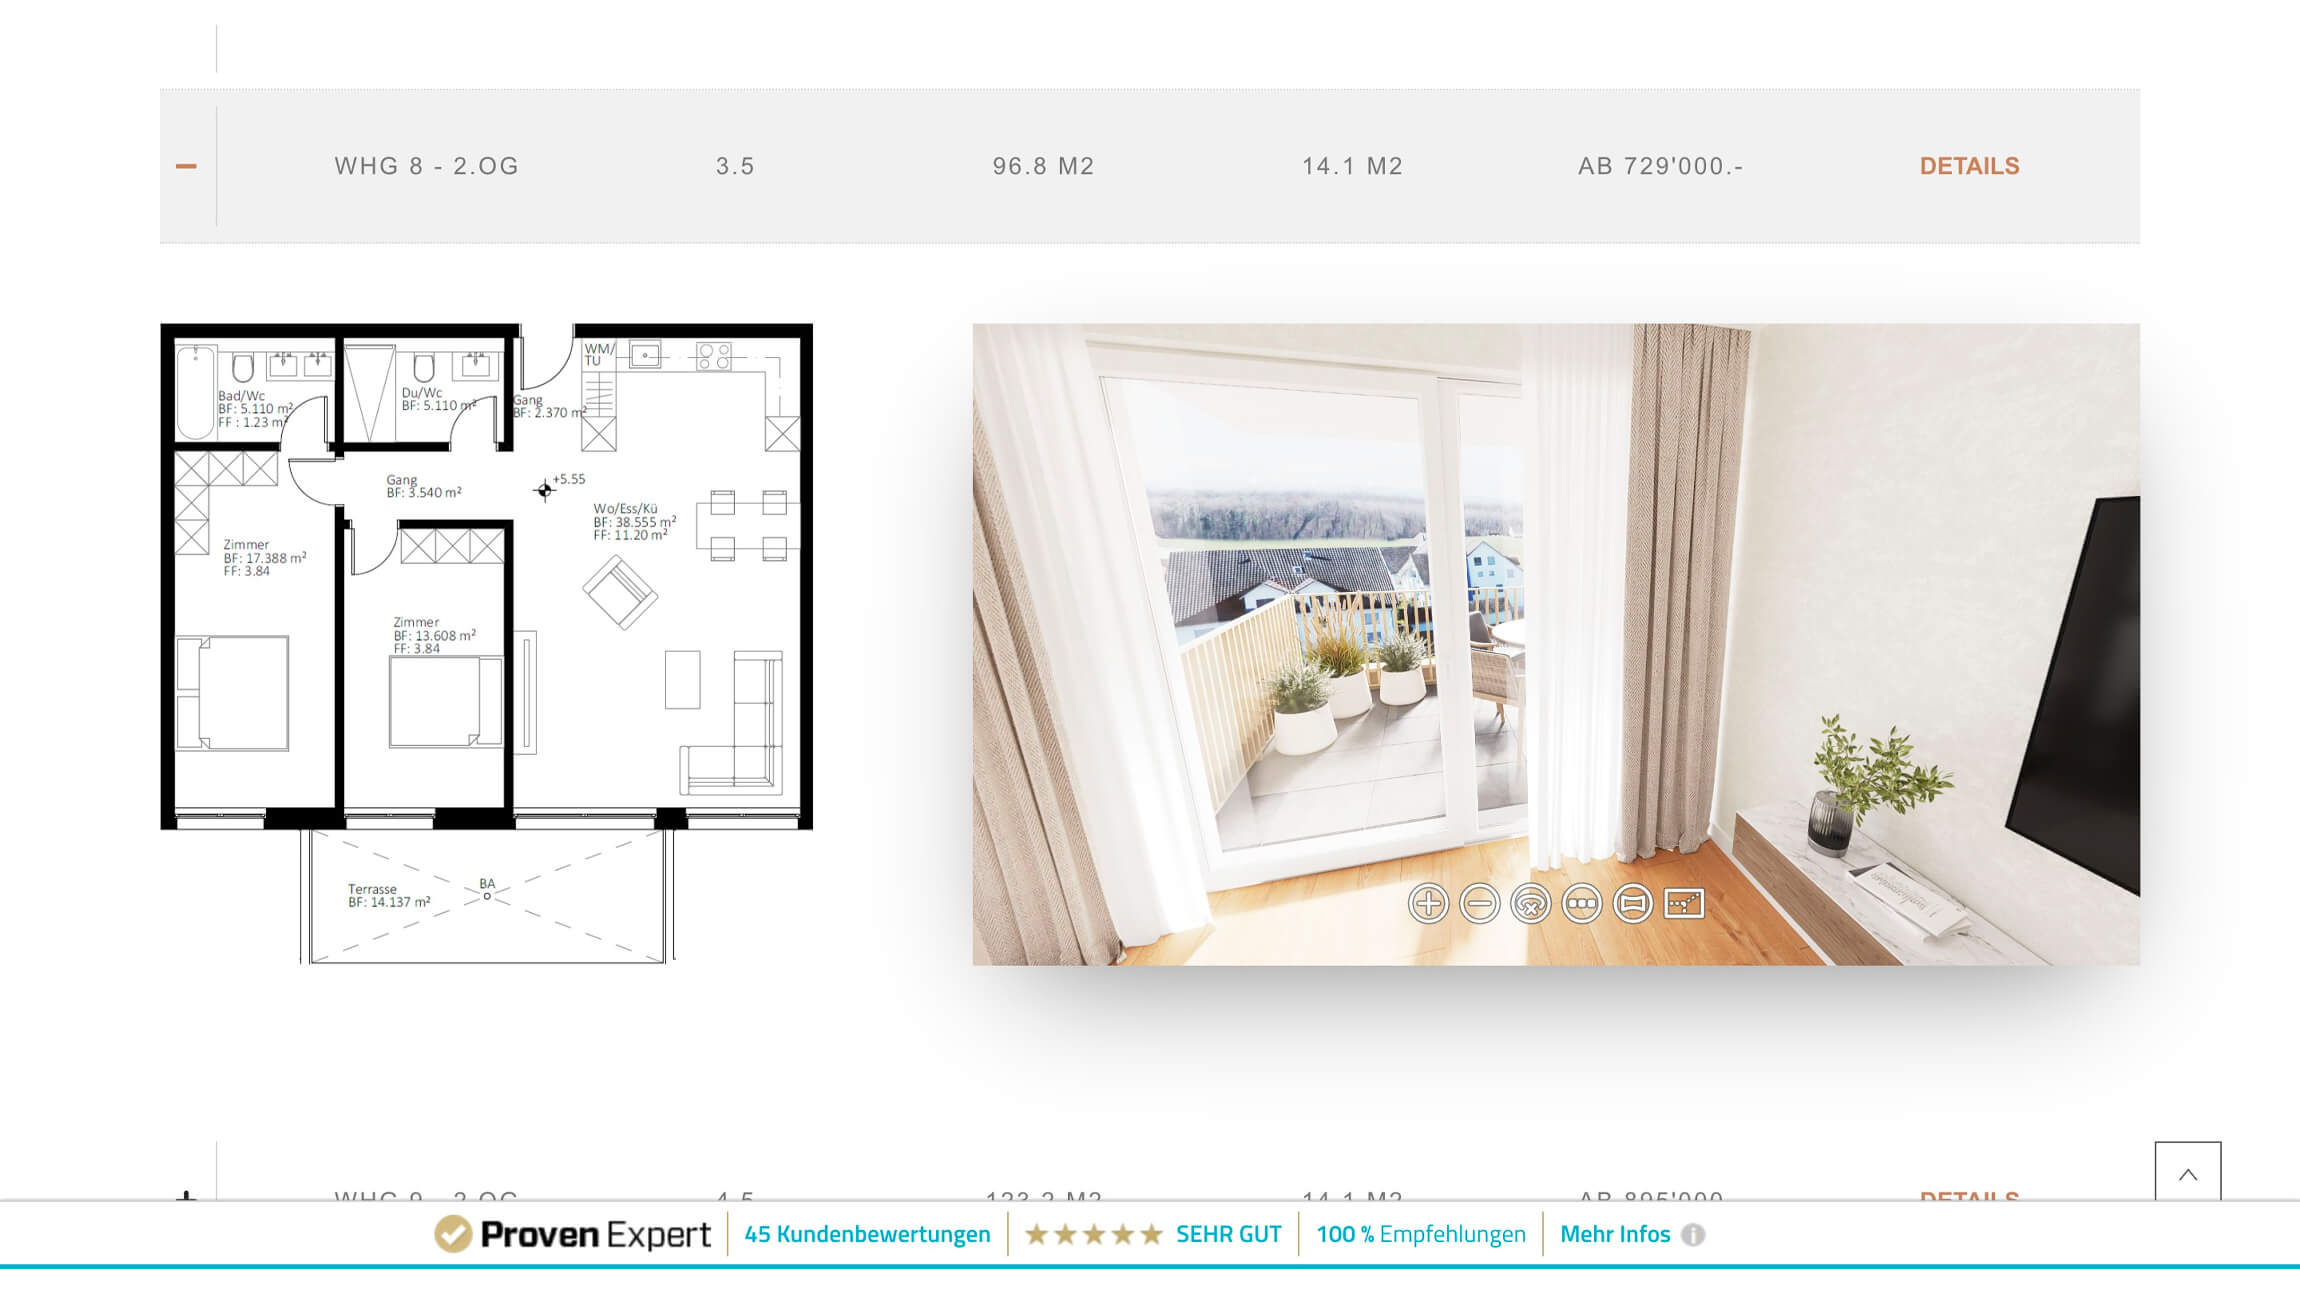 Real Estate 3D Rendering on a Company's Website